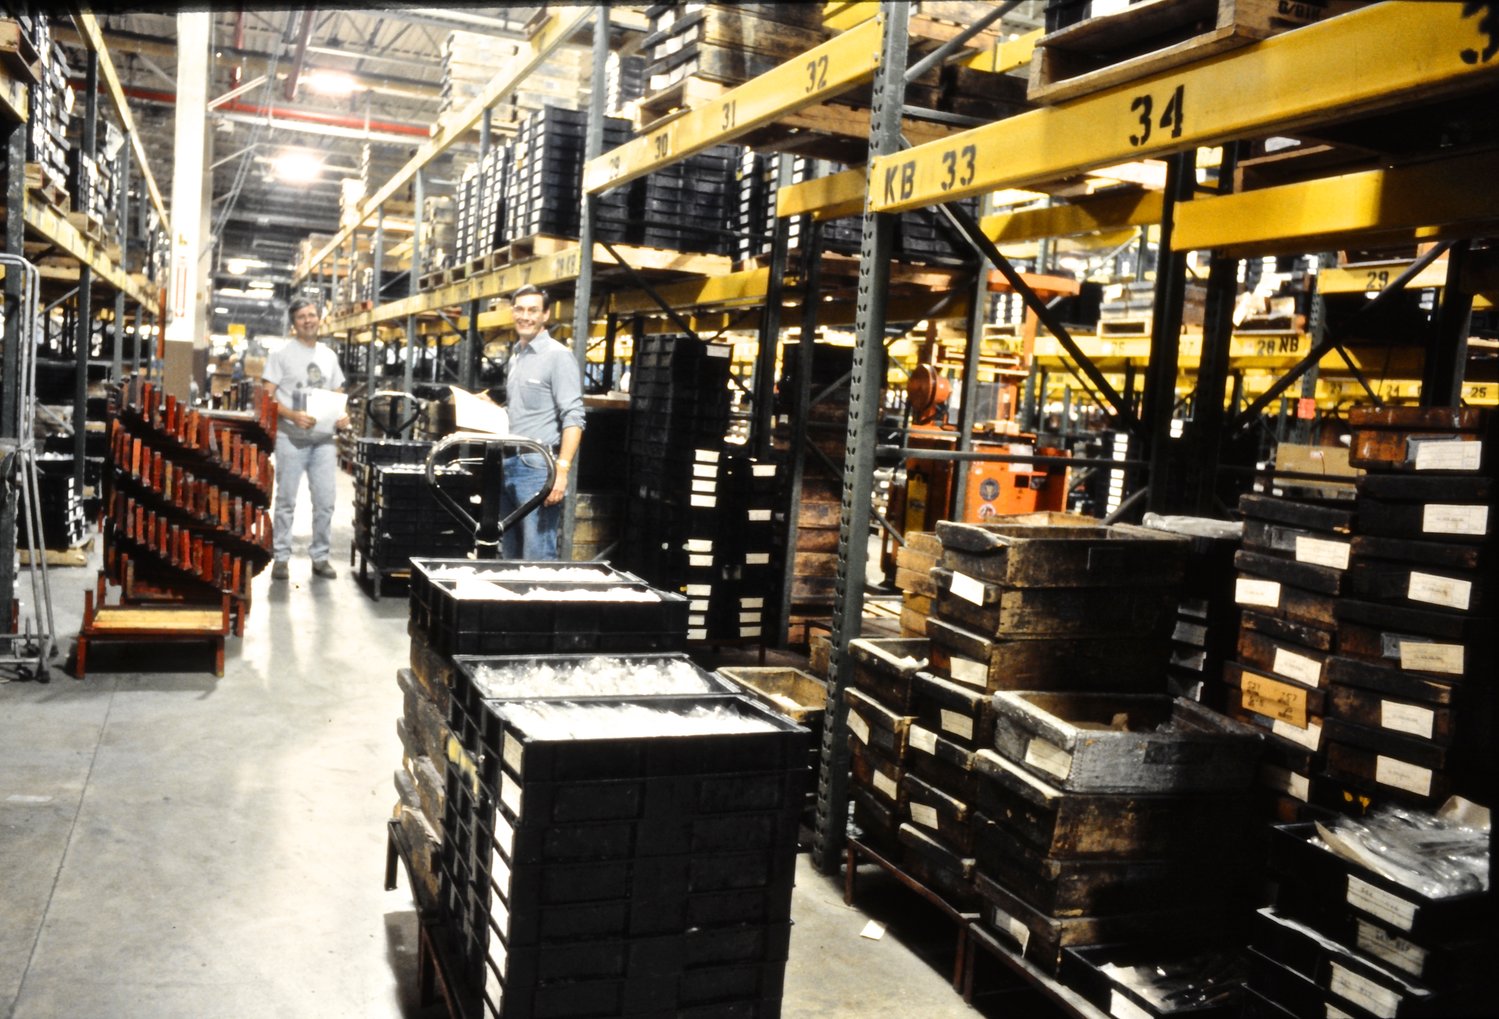 Two men restock inventory in the Oneida Limited warehouse.